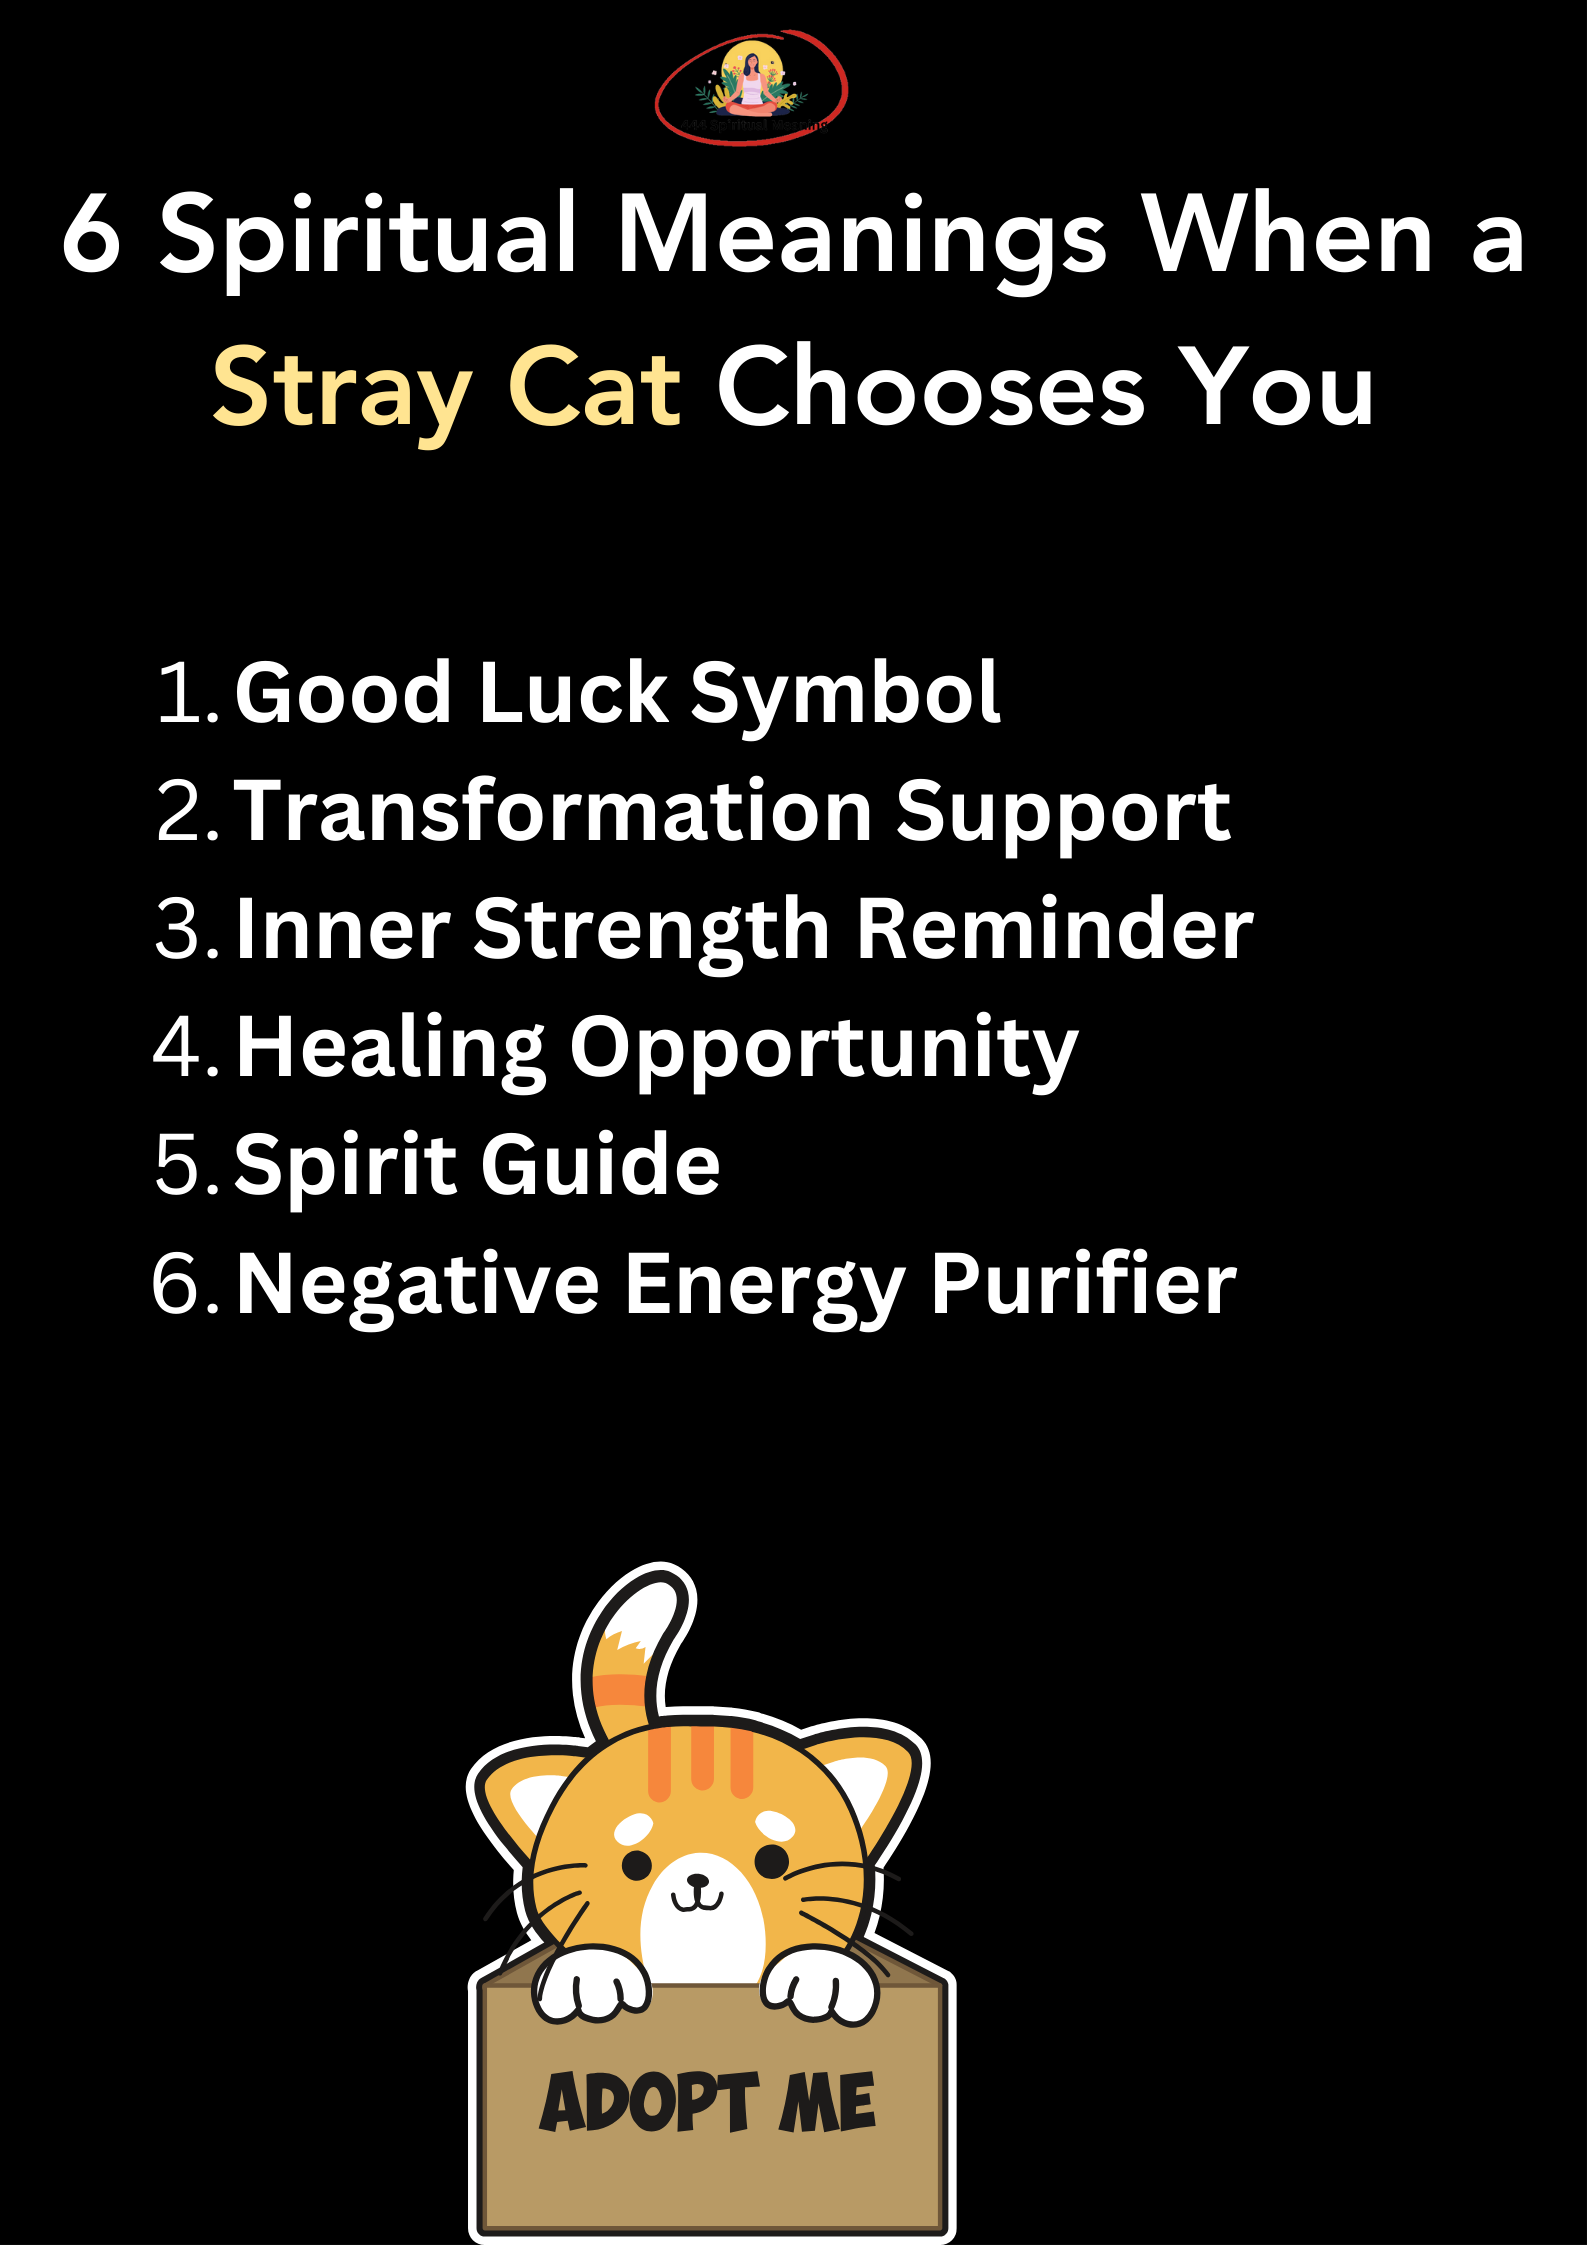 6 Spiritual Meanings When a Stray Cat Chooses You